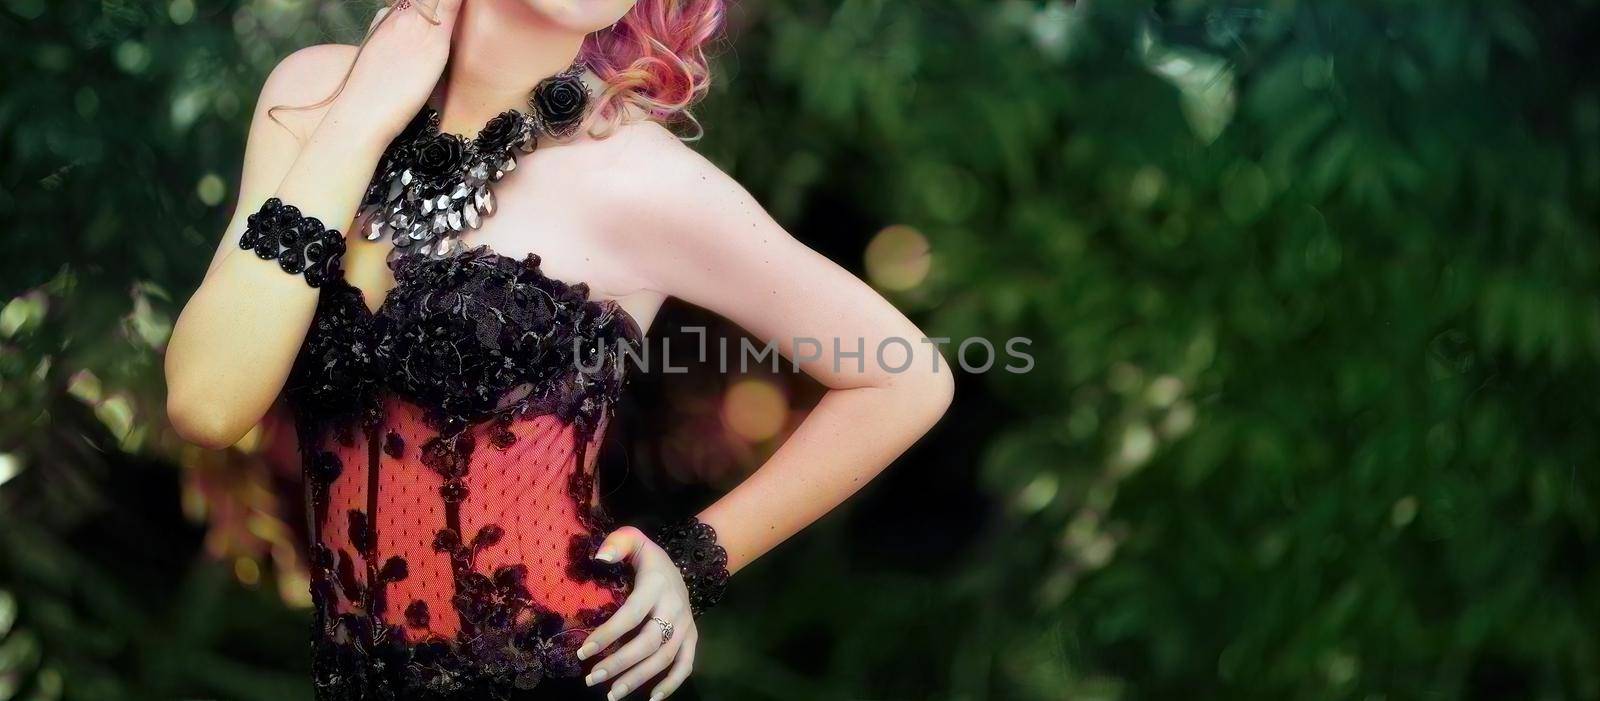 Soft focus - Elegant young woman posing outdoors in an embroidered black dress. Colorized image.